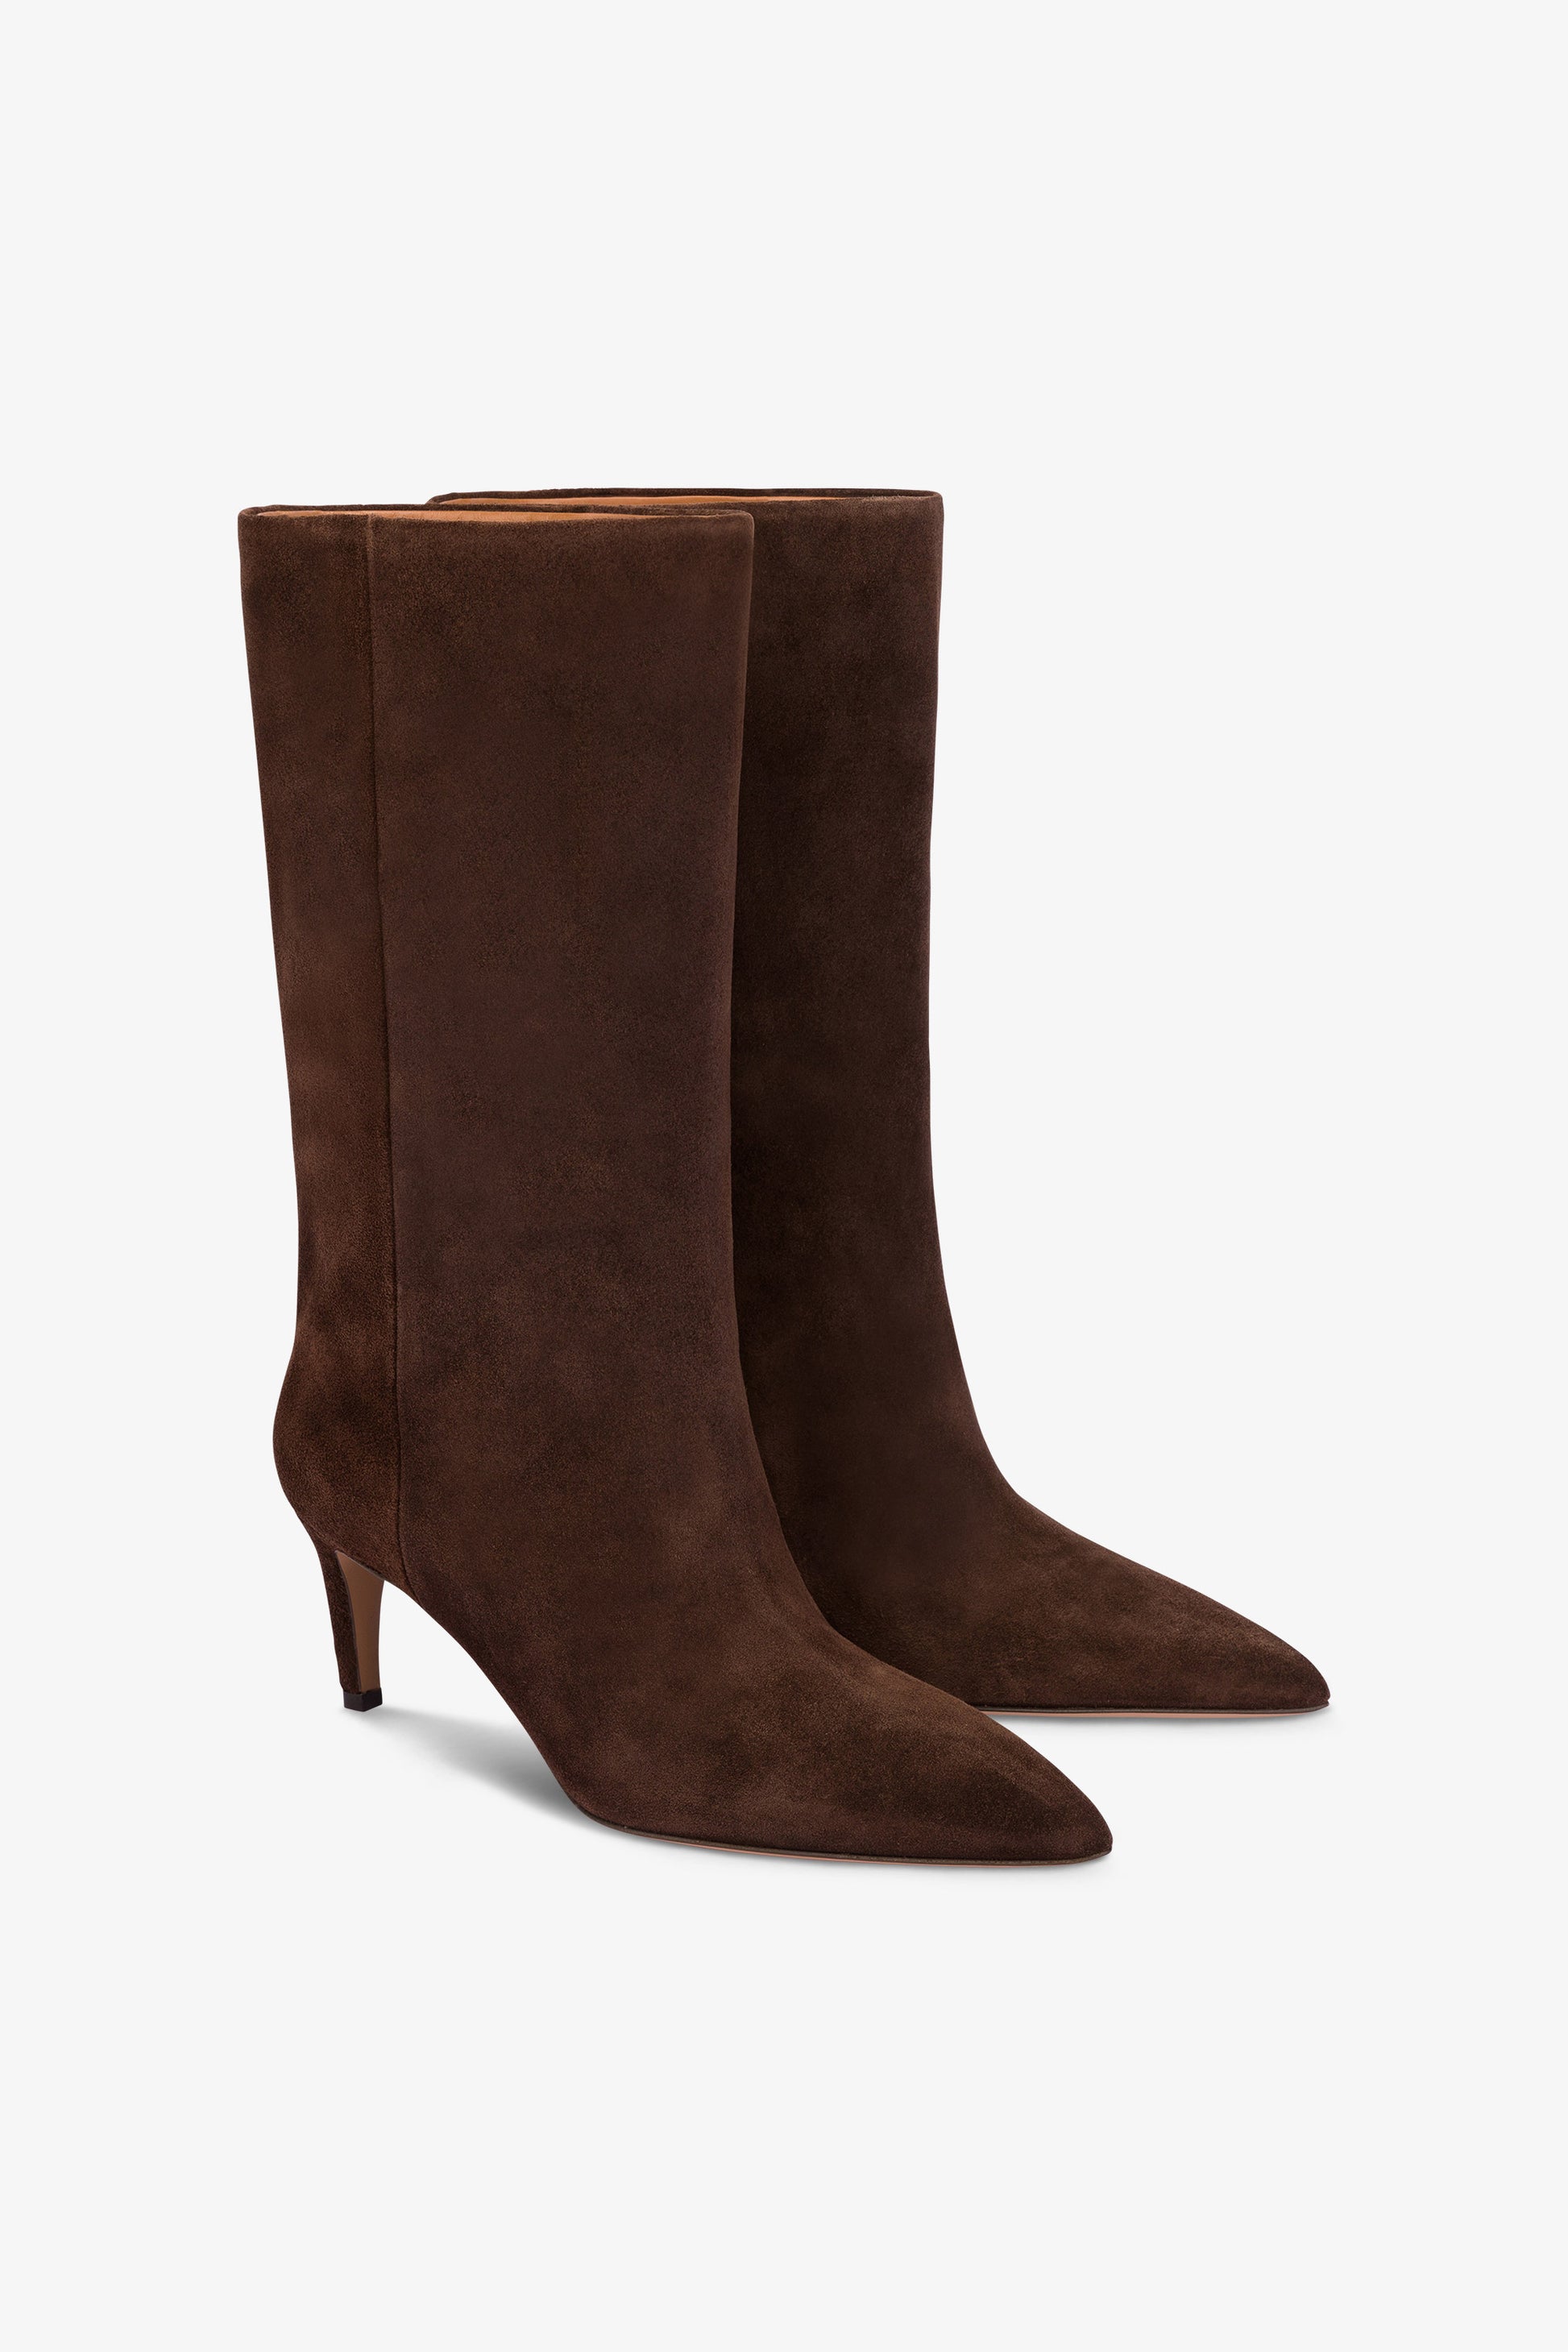 Calf-high boots in smooth pepper suede leather